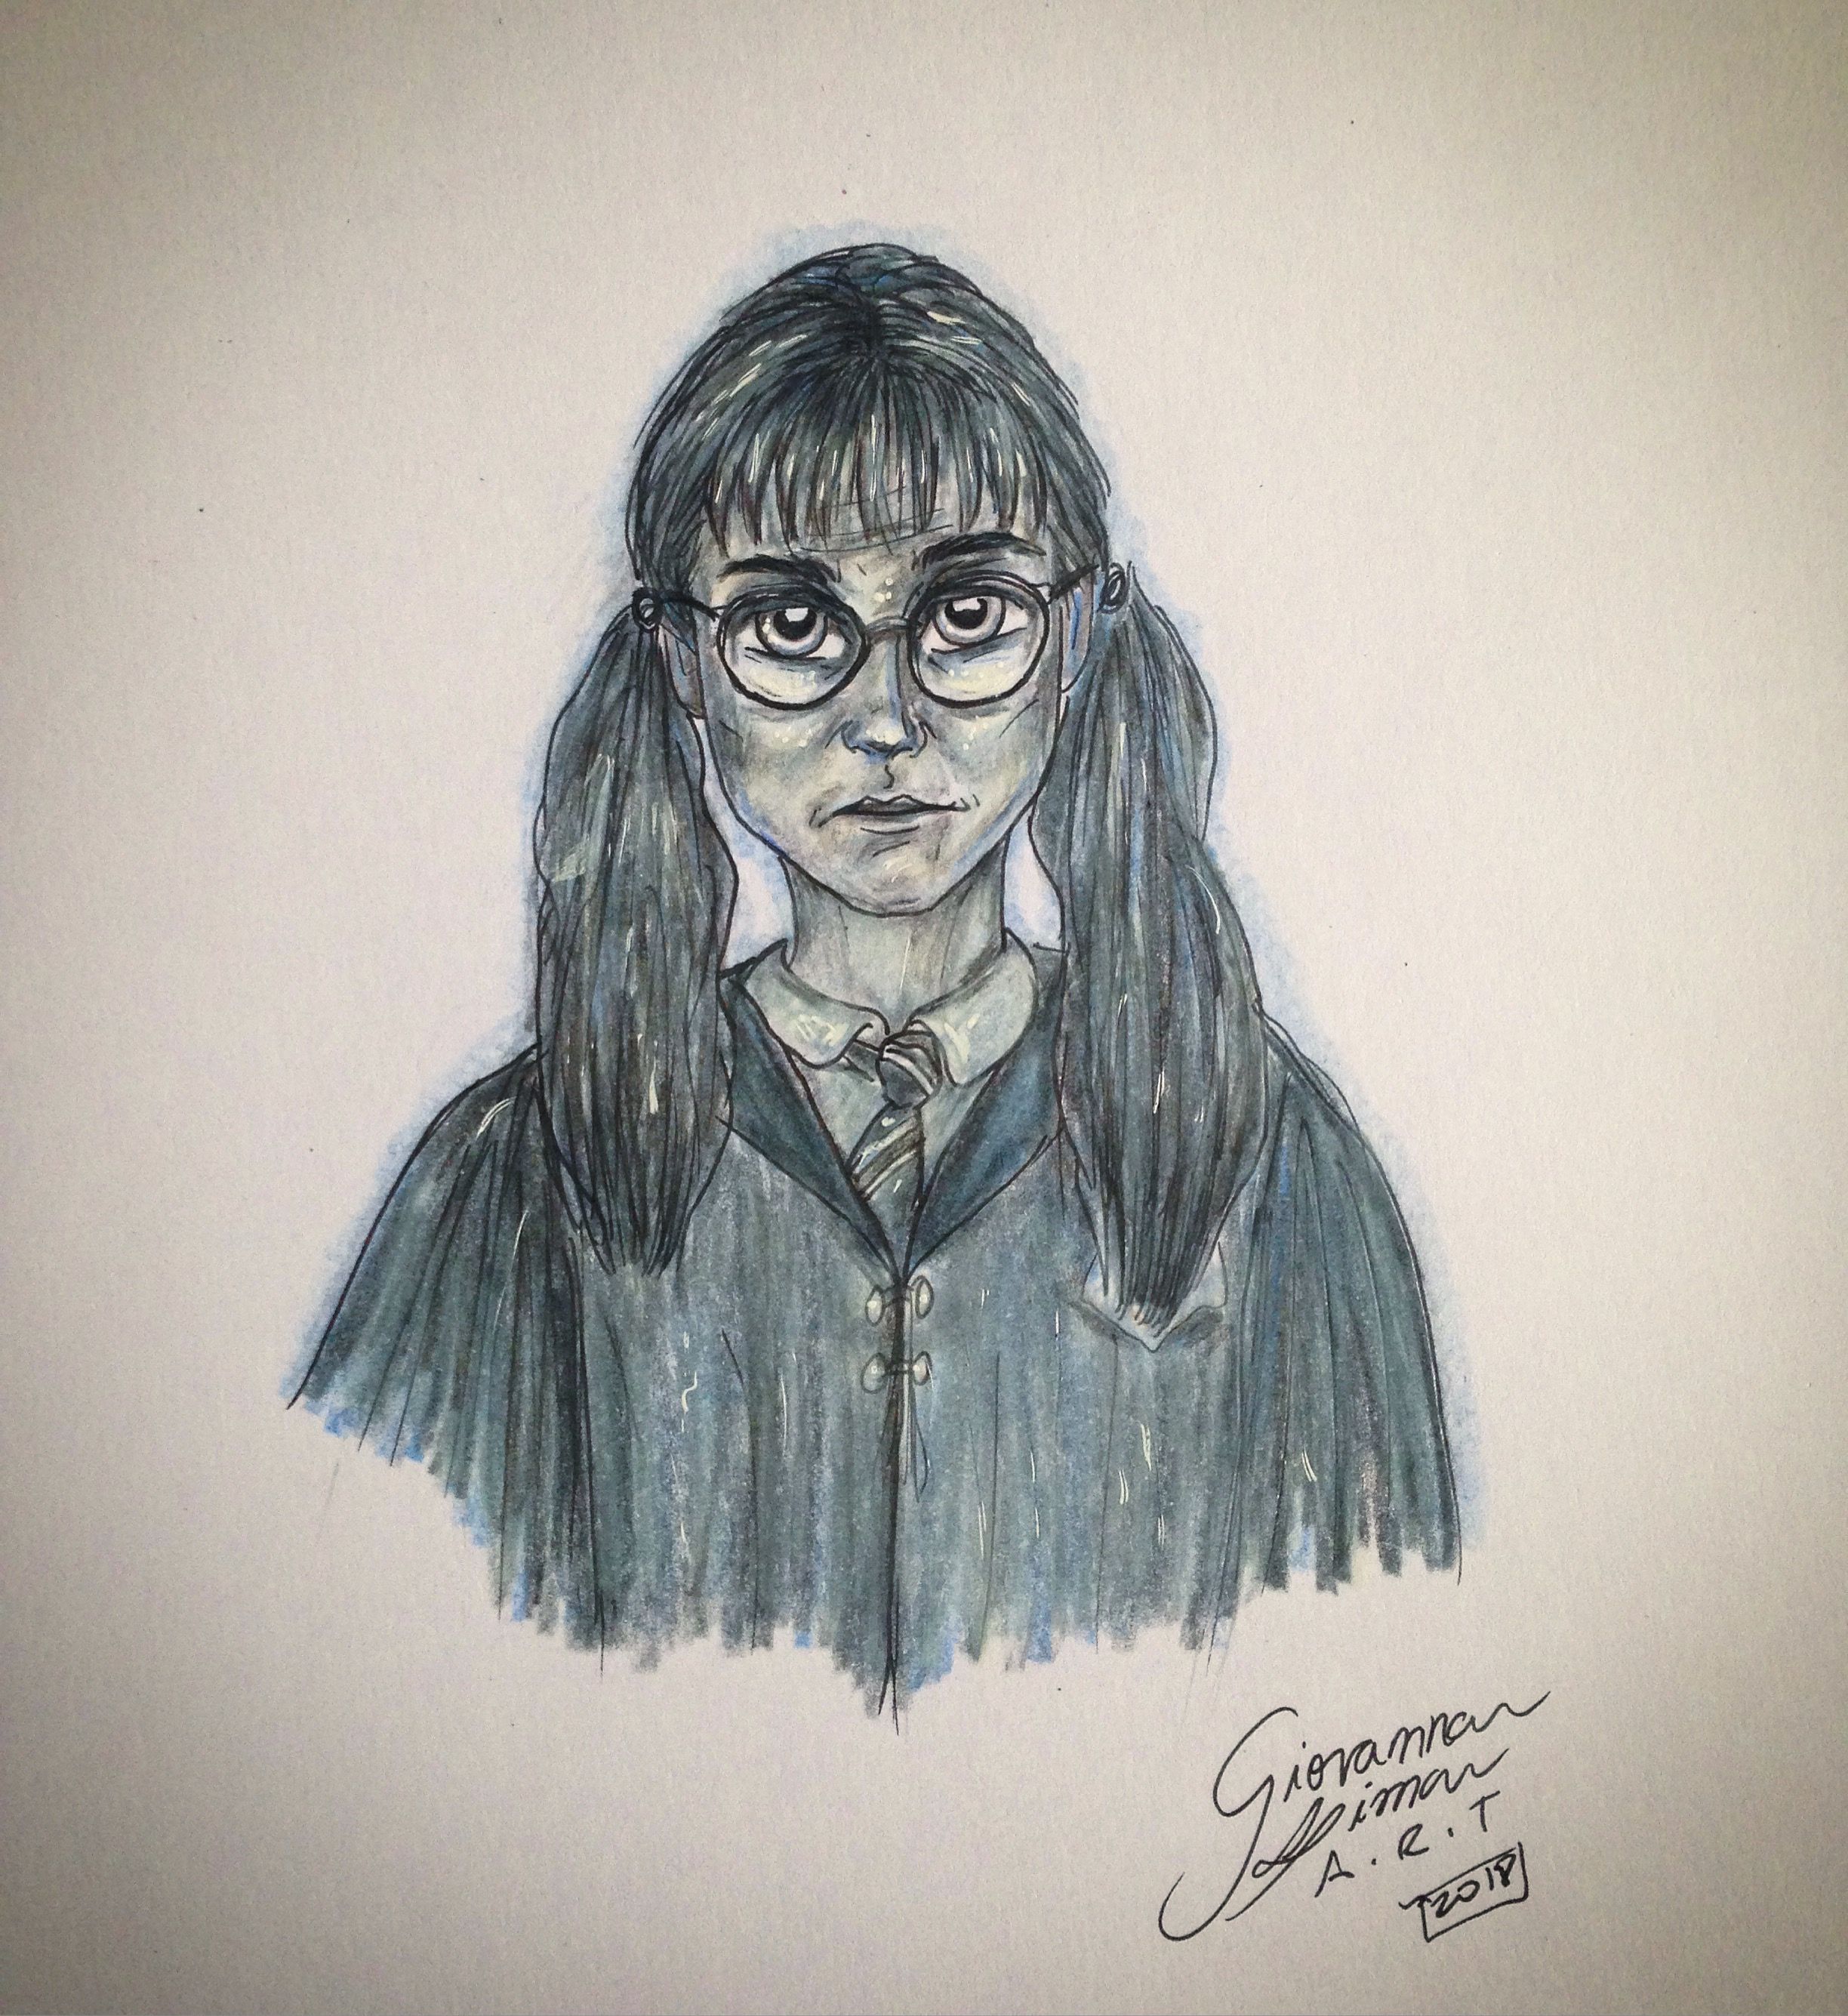 How to draw Harry Potter characters for children | I had a lot of fun  making this Harry Potter characters tutorial. Are there any other  characters you'd like to see? Perhaps Disney